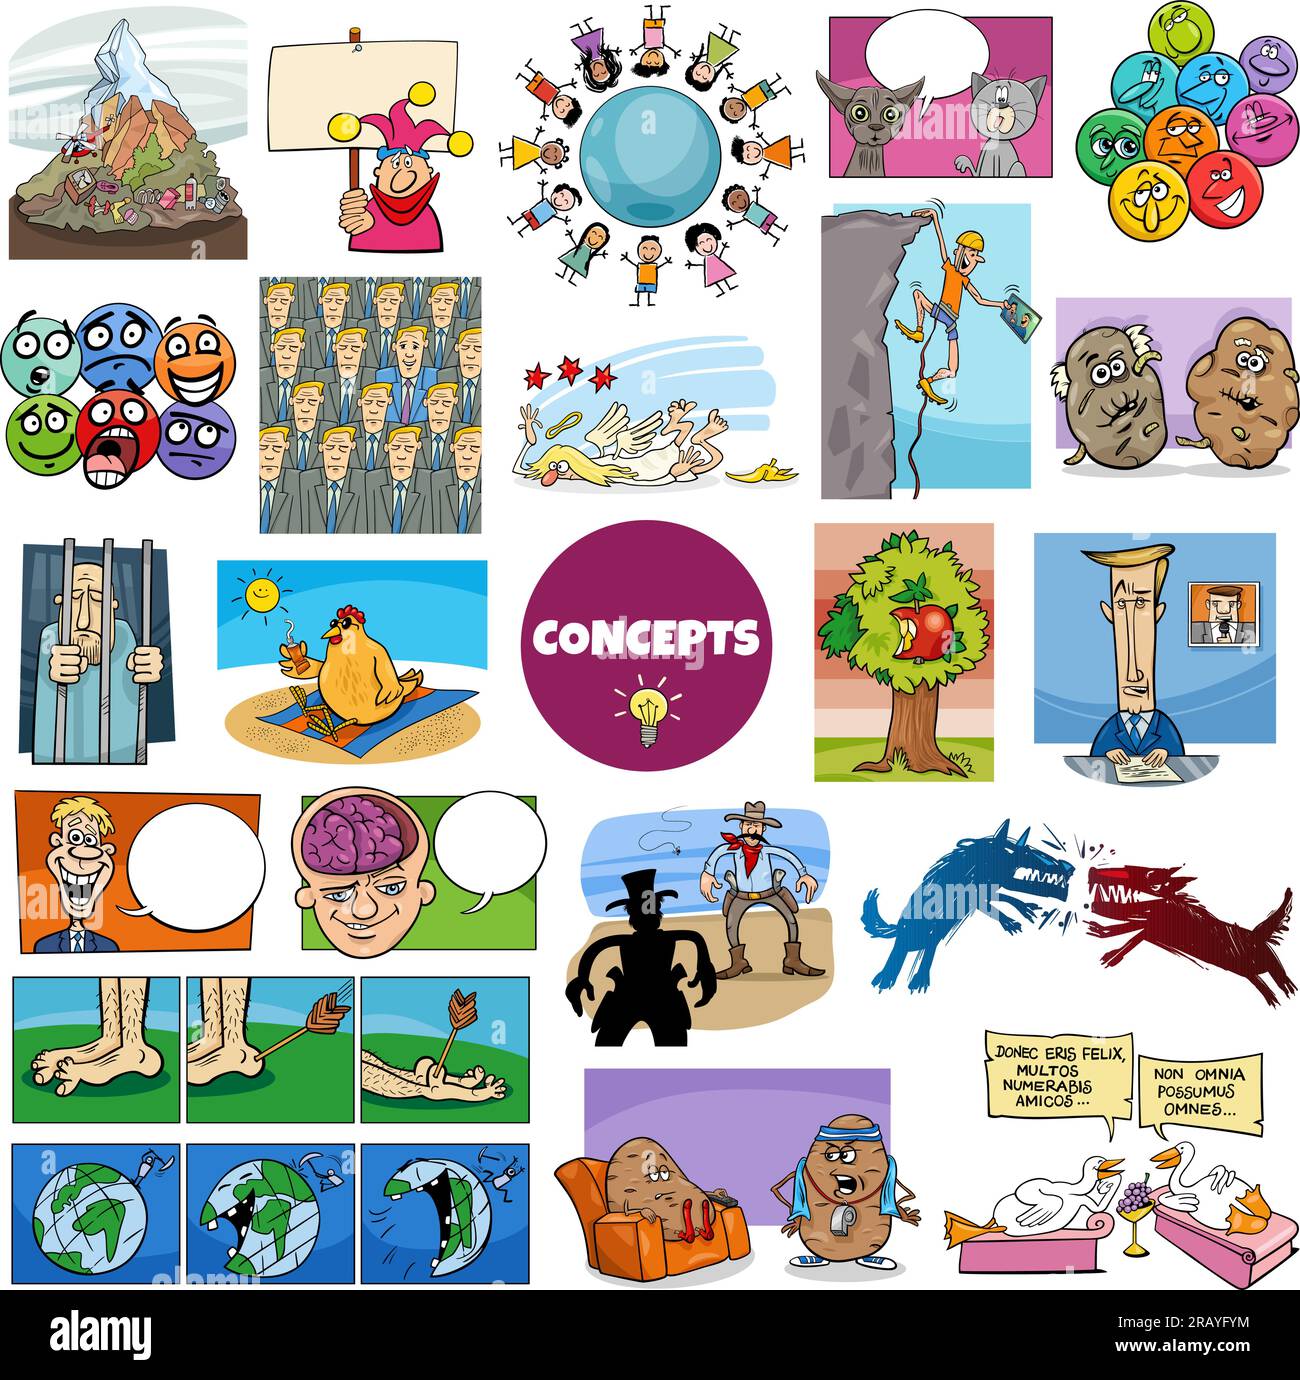 Illustration big set of humorous cartoon concepts or metaphors and ideas with comic characters Stock Vector